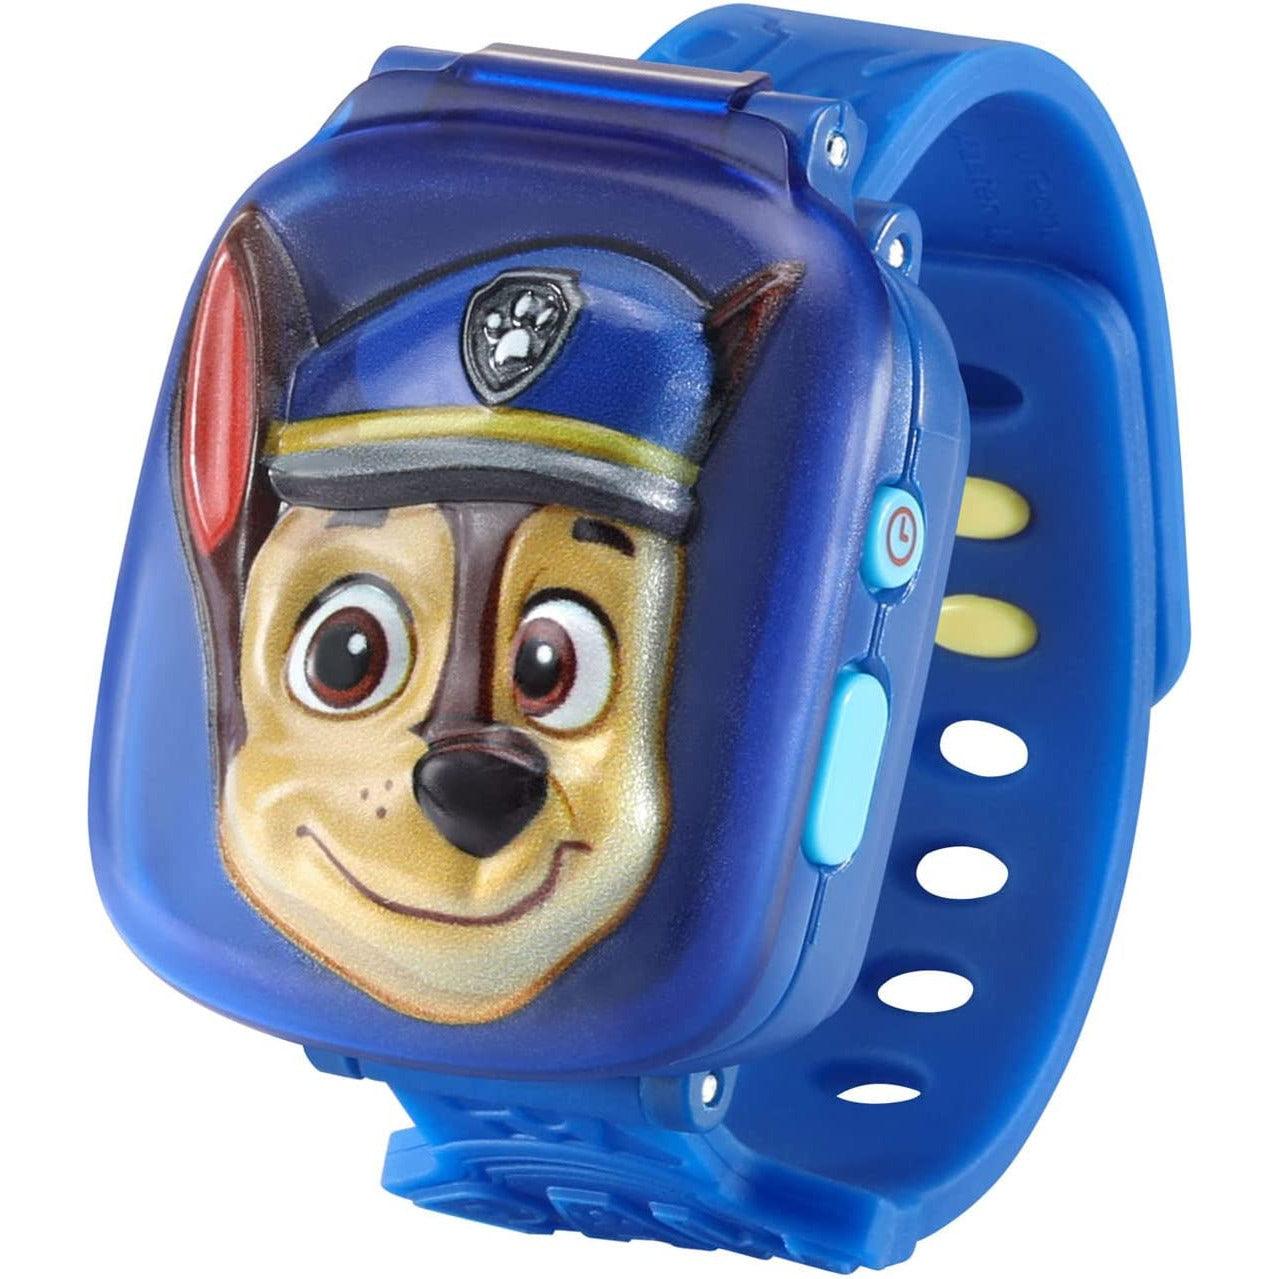 VTech PAW Patrol Learning Pup Watch, Chase - BumbleToys - 5-7 Years, Kids, Paw Patrol, Pre-Order, Watch